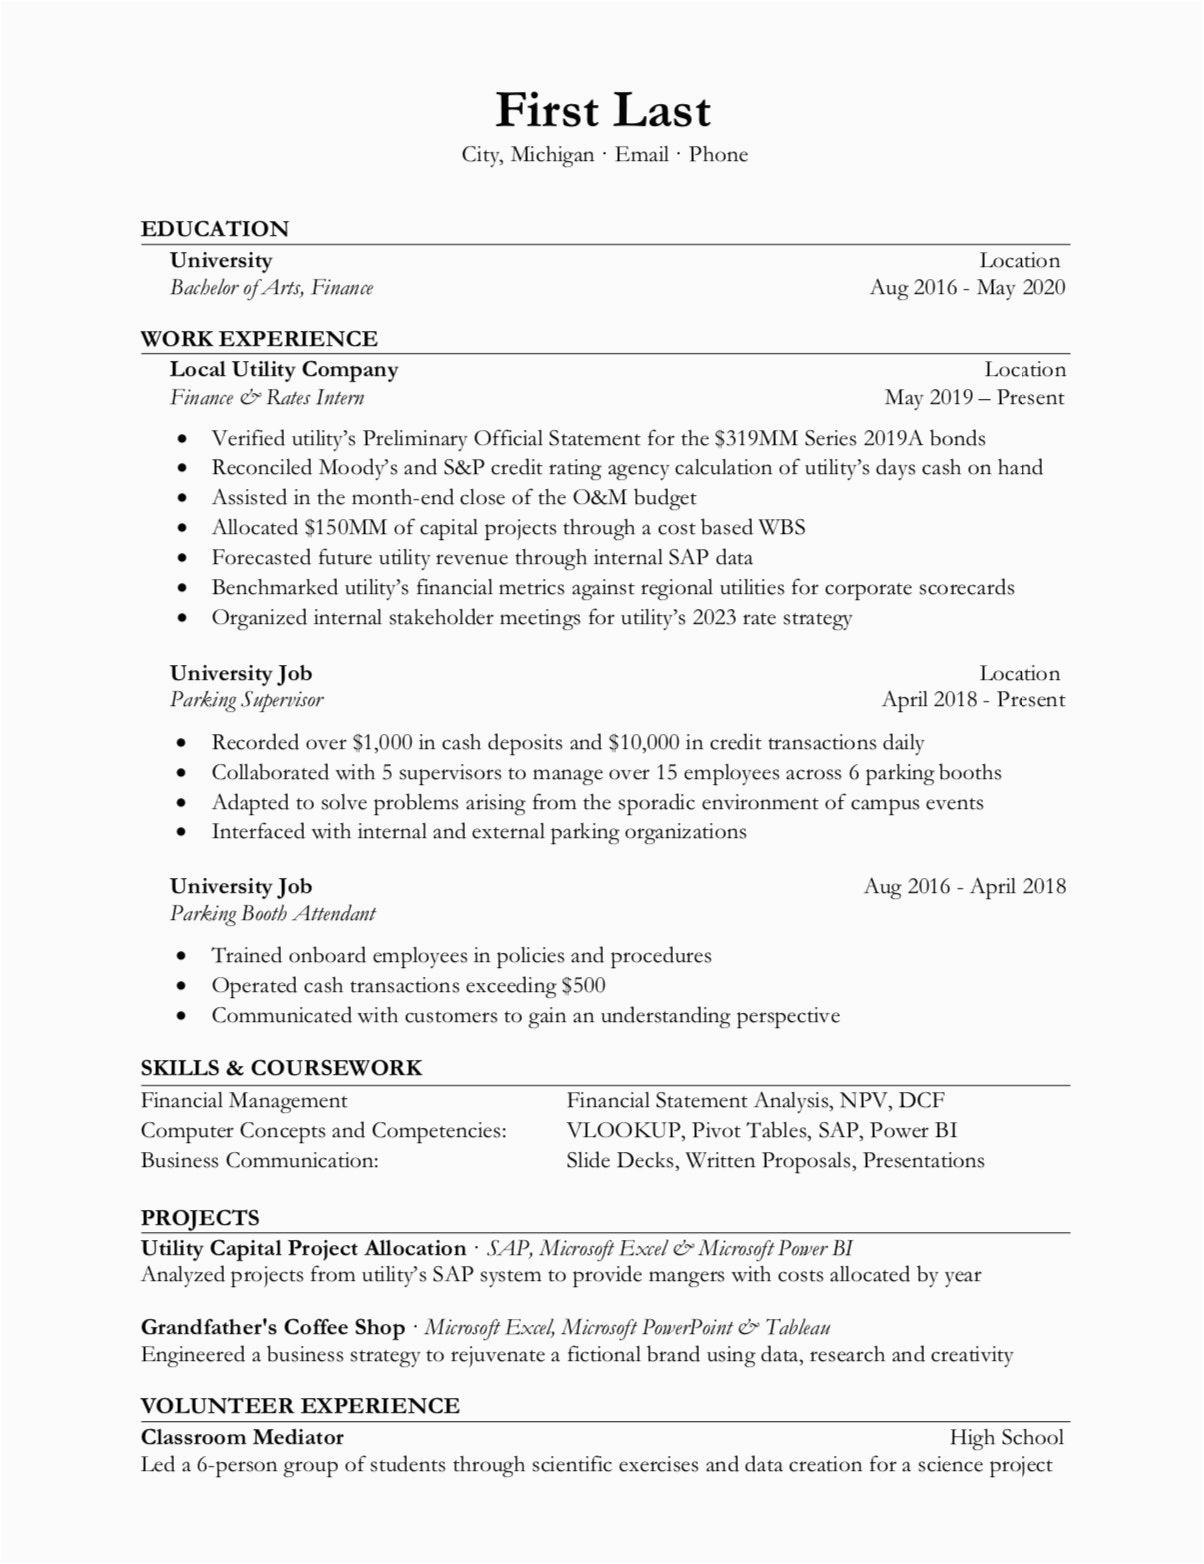 Sample Resume for A Finance Coop Resume Review Request Full Time Corporate Finance Position